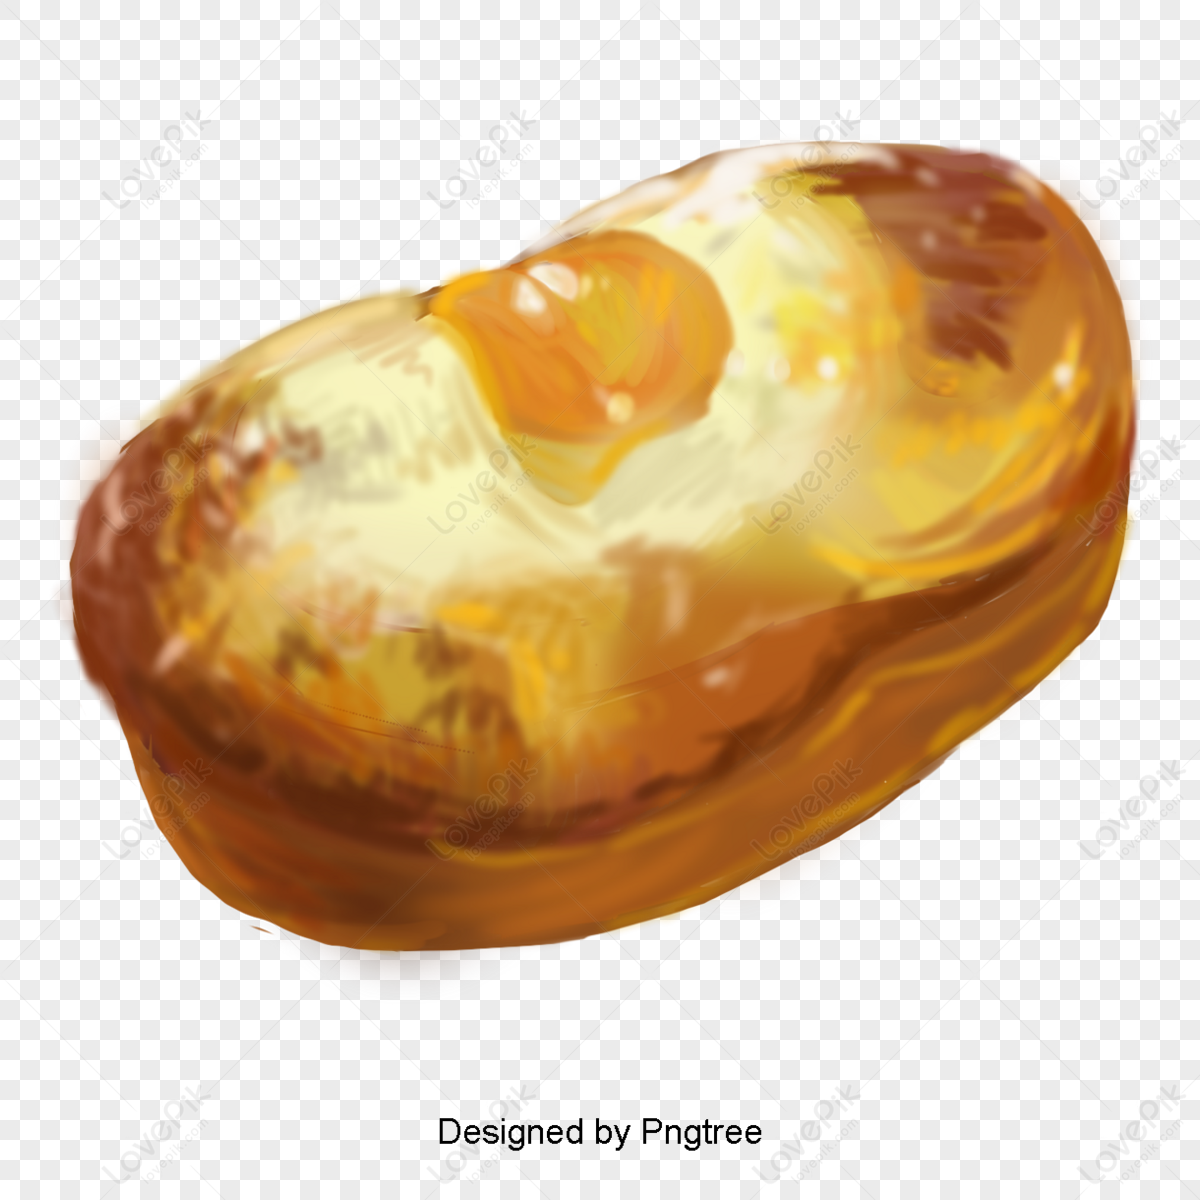 South Korea  food eggs bread hand painted illustrations,foods,painting illustrator png image free download